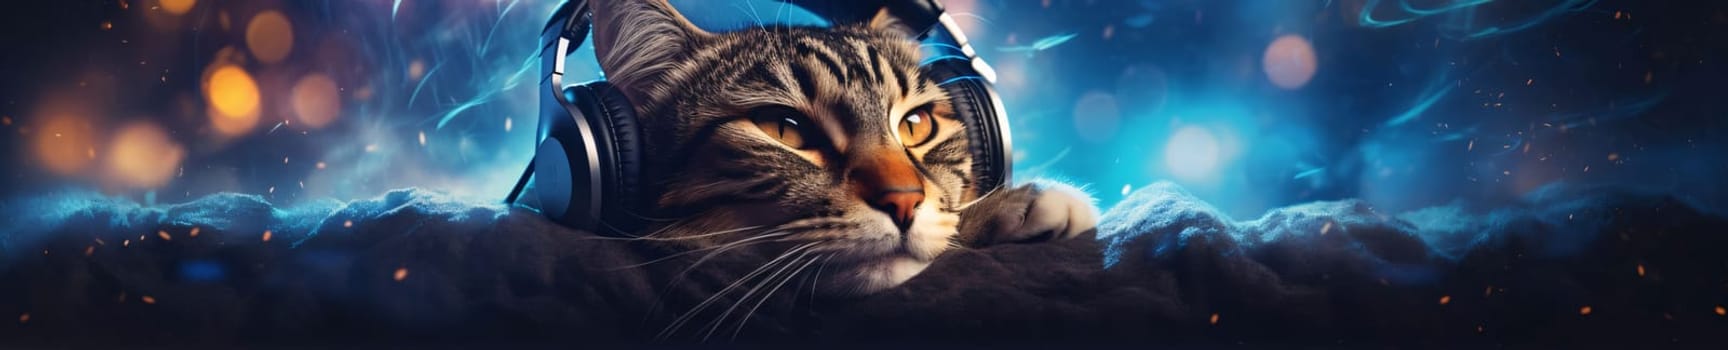 Banner: Portrait of a cat wearing headphones and listening to music. Mixed media